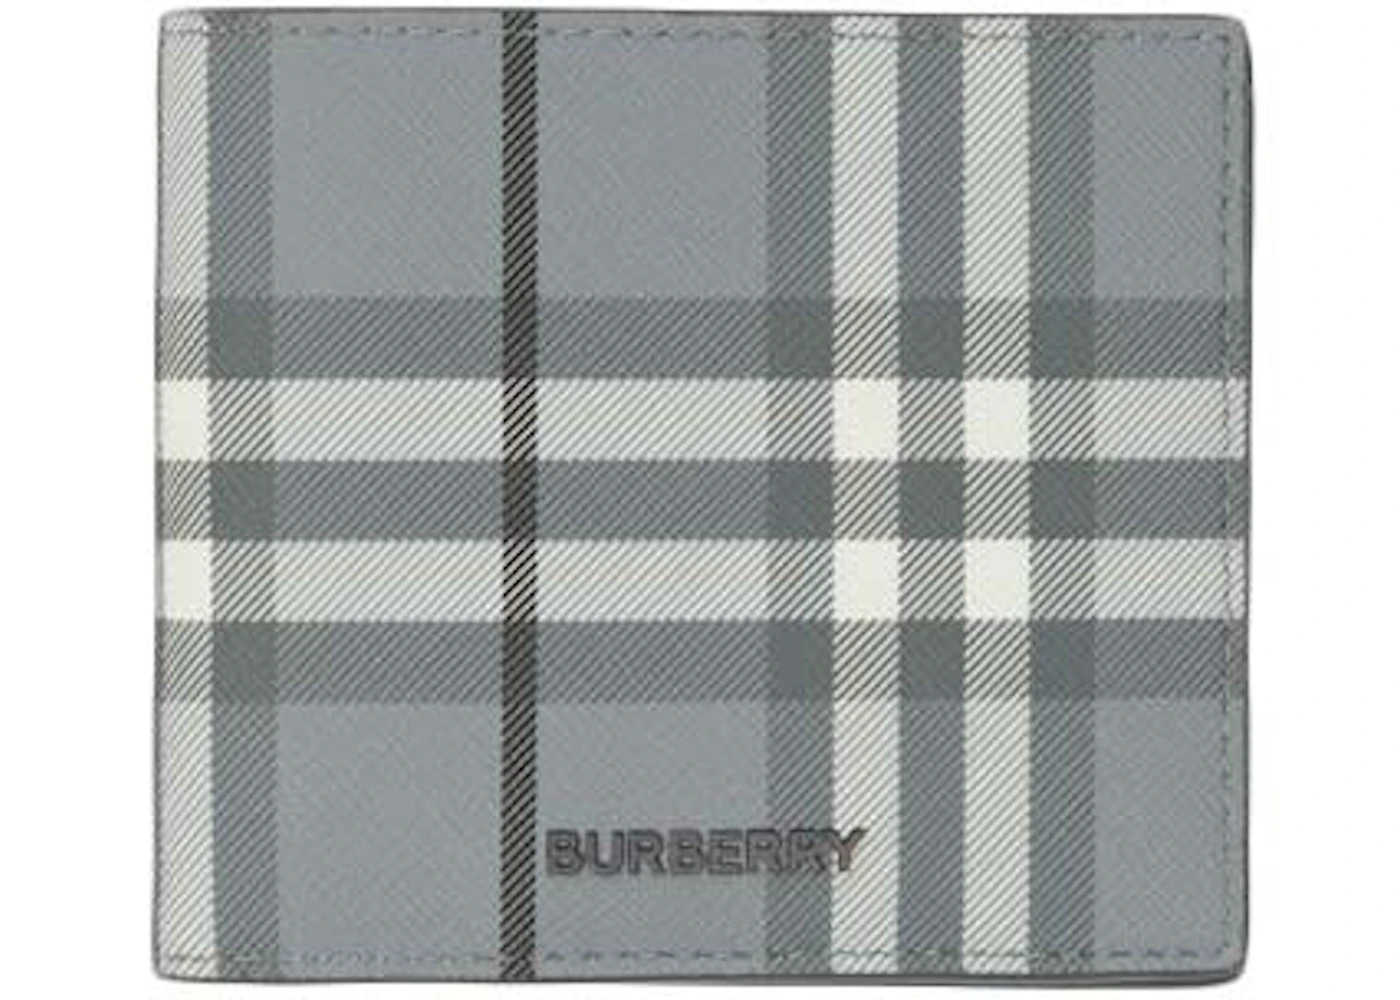 Burberry Vintage Check Bifold Wallet (8 Card Slot) Storm Grey Check in ...